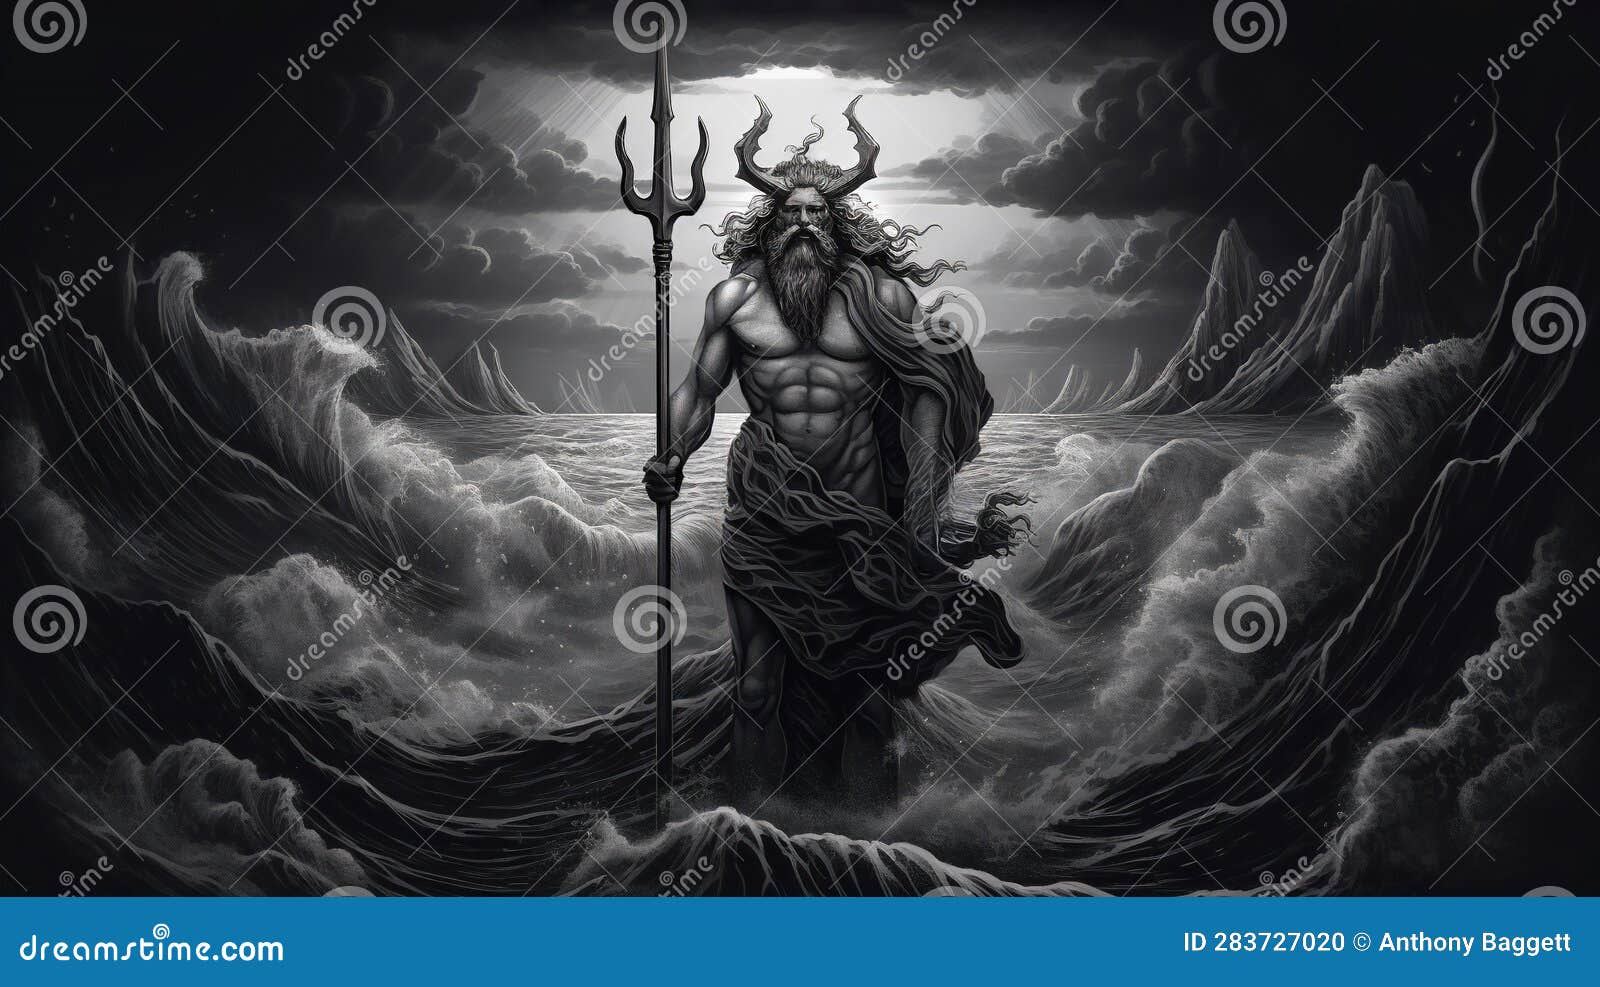 engraving portrait of neptune the roman god of the sea who's greek equivalent is poseidon